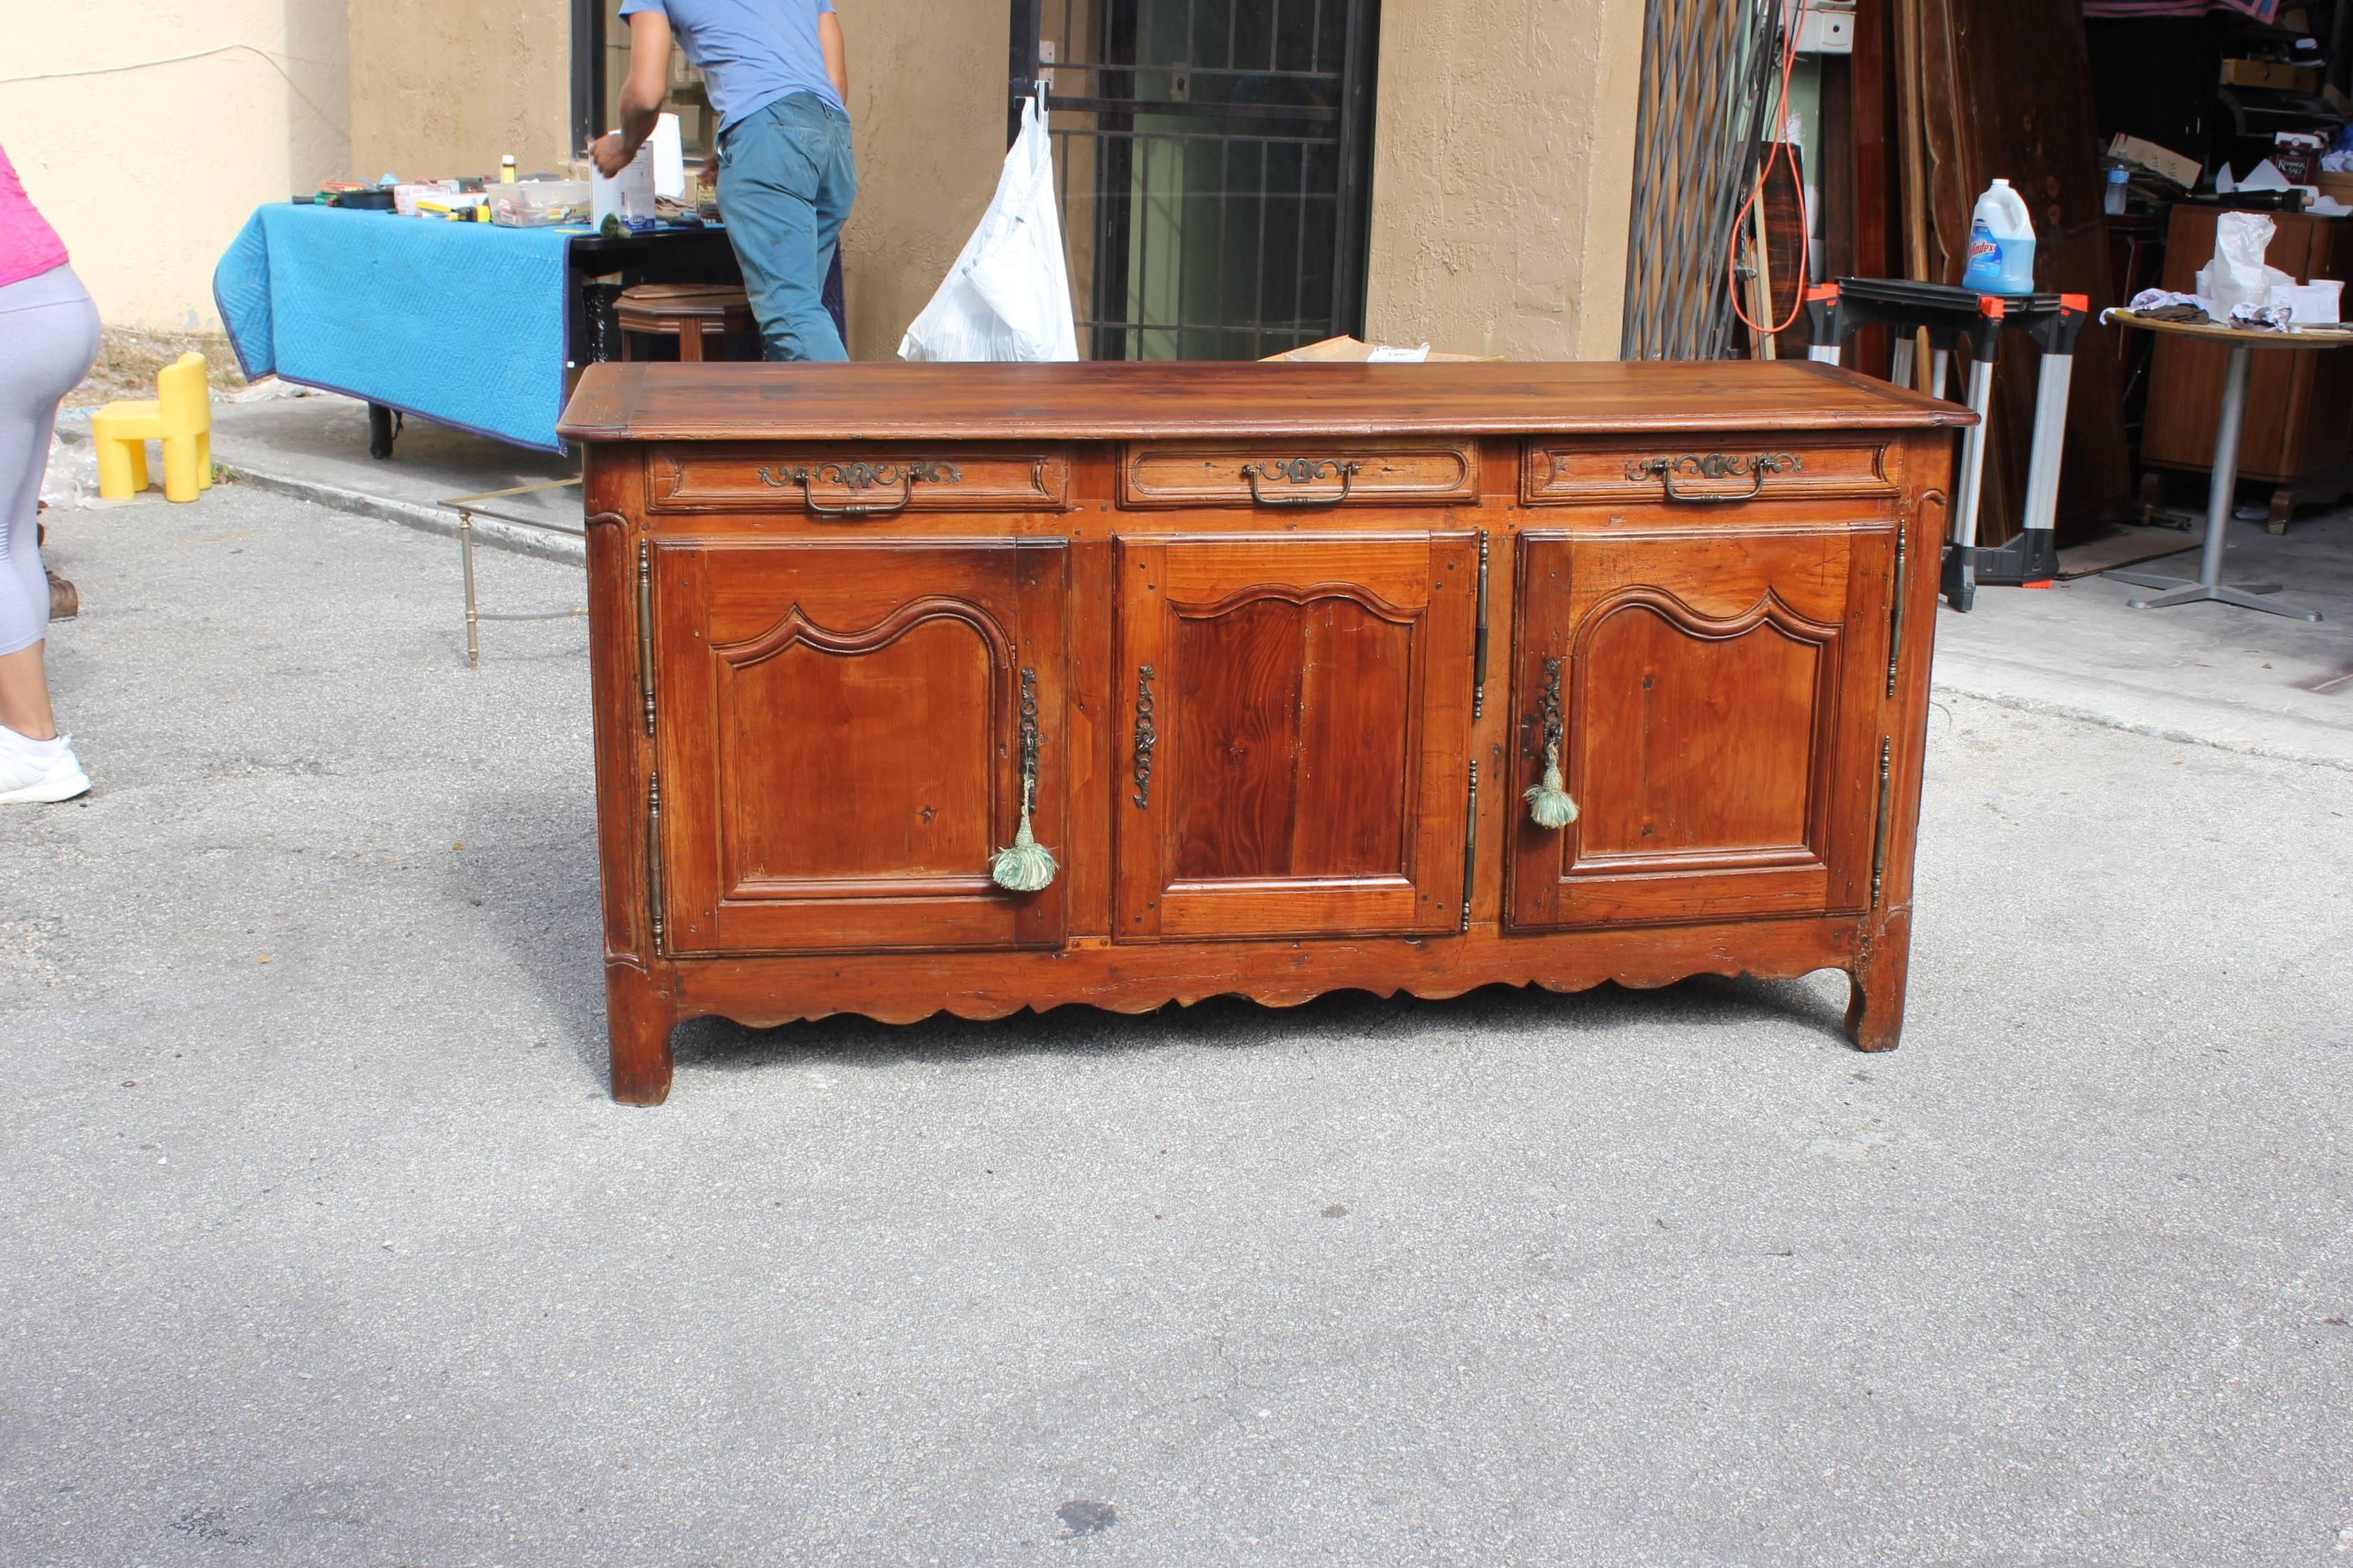 Charming, large country French Louis XV period chateau sideboard handcrafted of solid and beautifully patinated cherry by talented artisans from south France, consisting of a shaped top sitting upon an elegant facade boasting three drawers, each